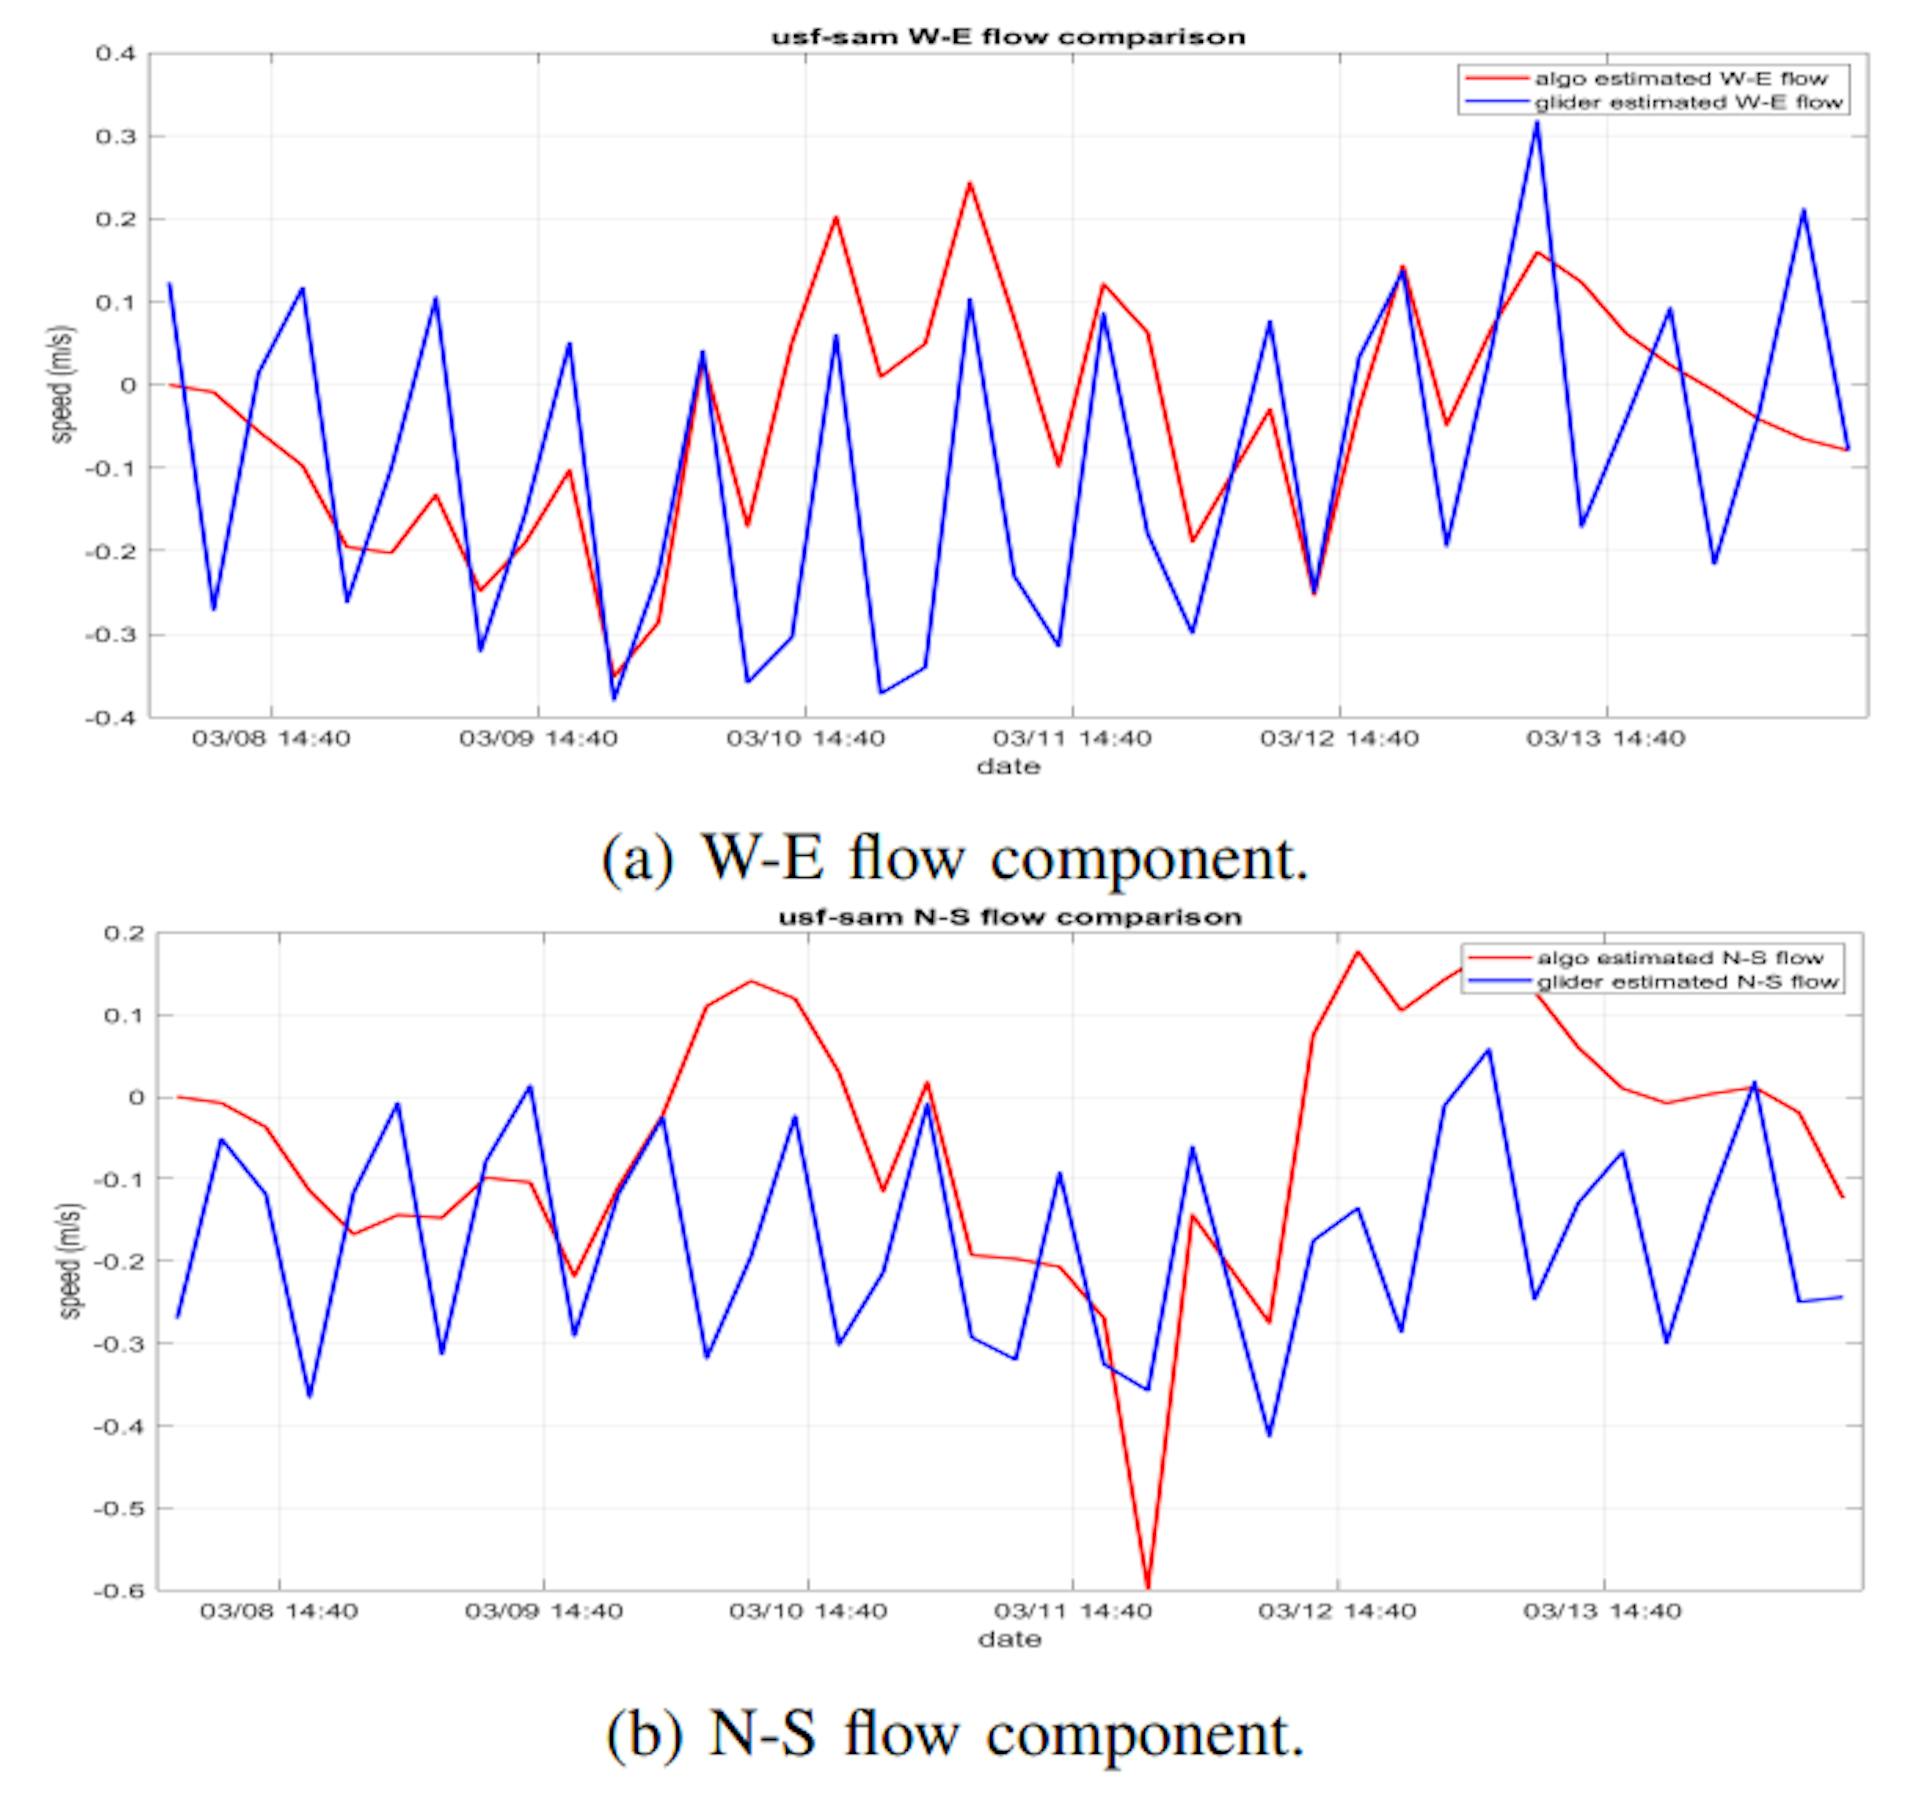 Fig. 11: Comparison of glider-estimated and algorithmestimated W-E (u, upper) and N-S (v, lower) flow velocities for the 2023 USF-Sam deployment.